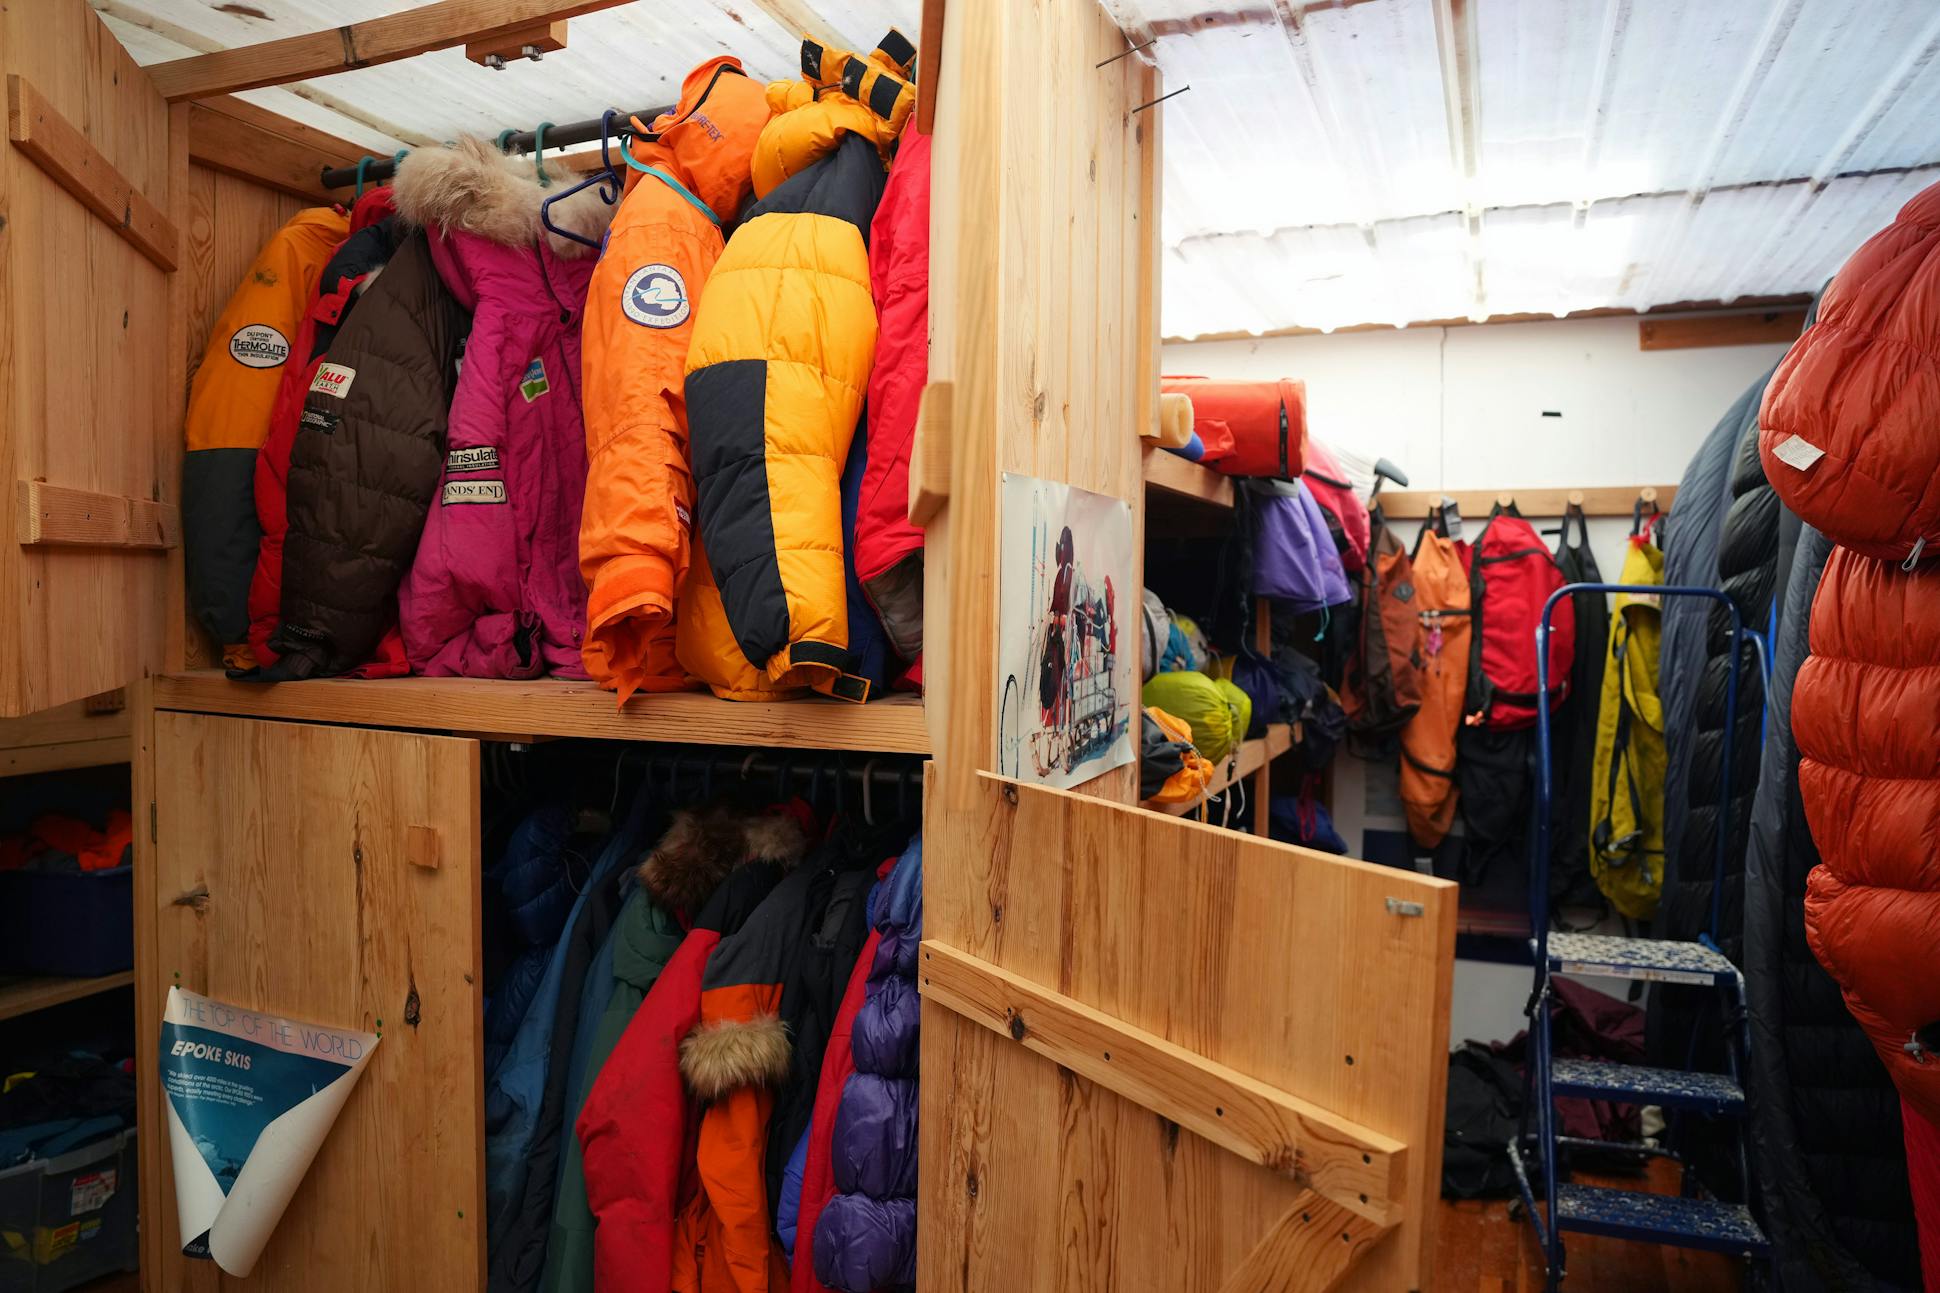 A storage building at his homestead held all manner of Steger expedition gear, from parkas to skis to thermos, and on.